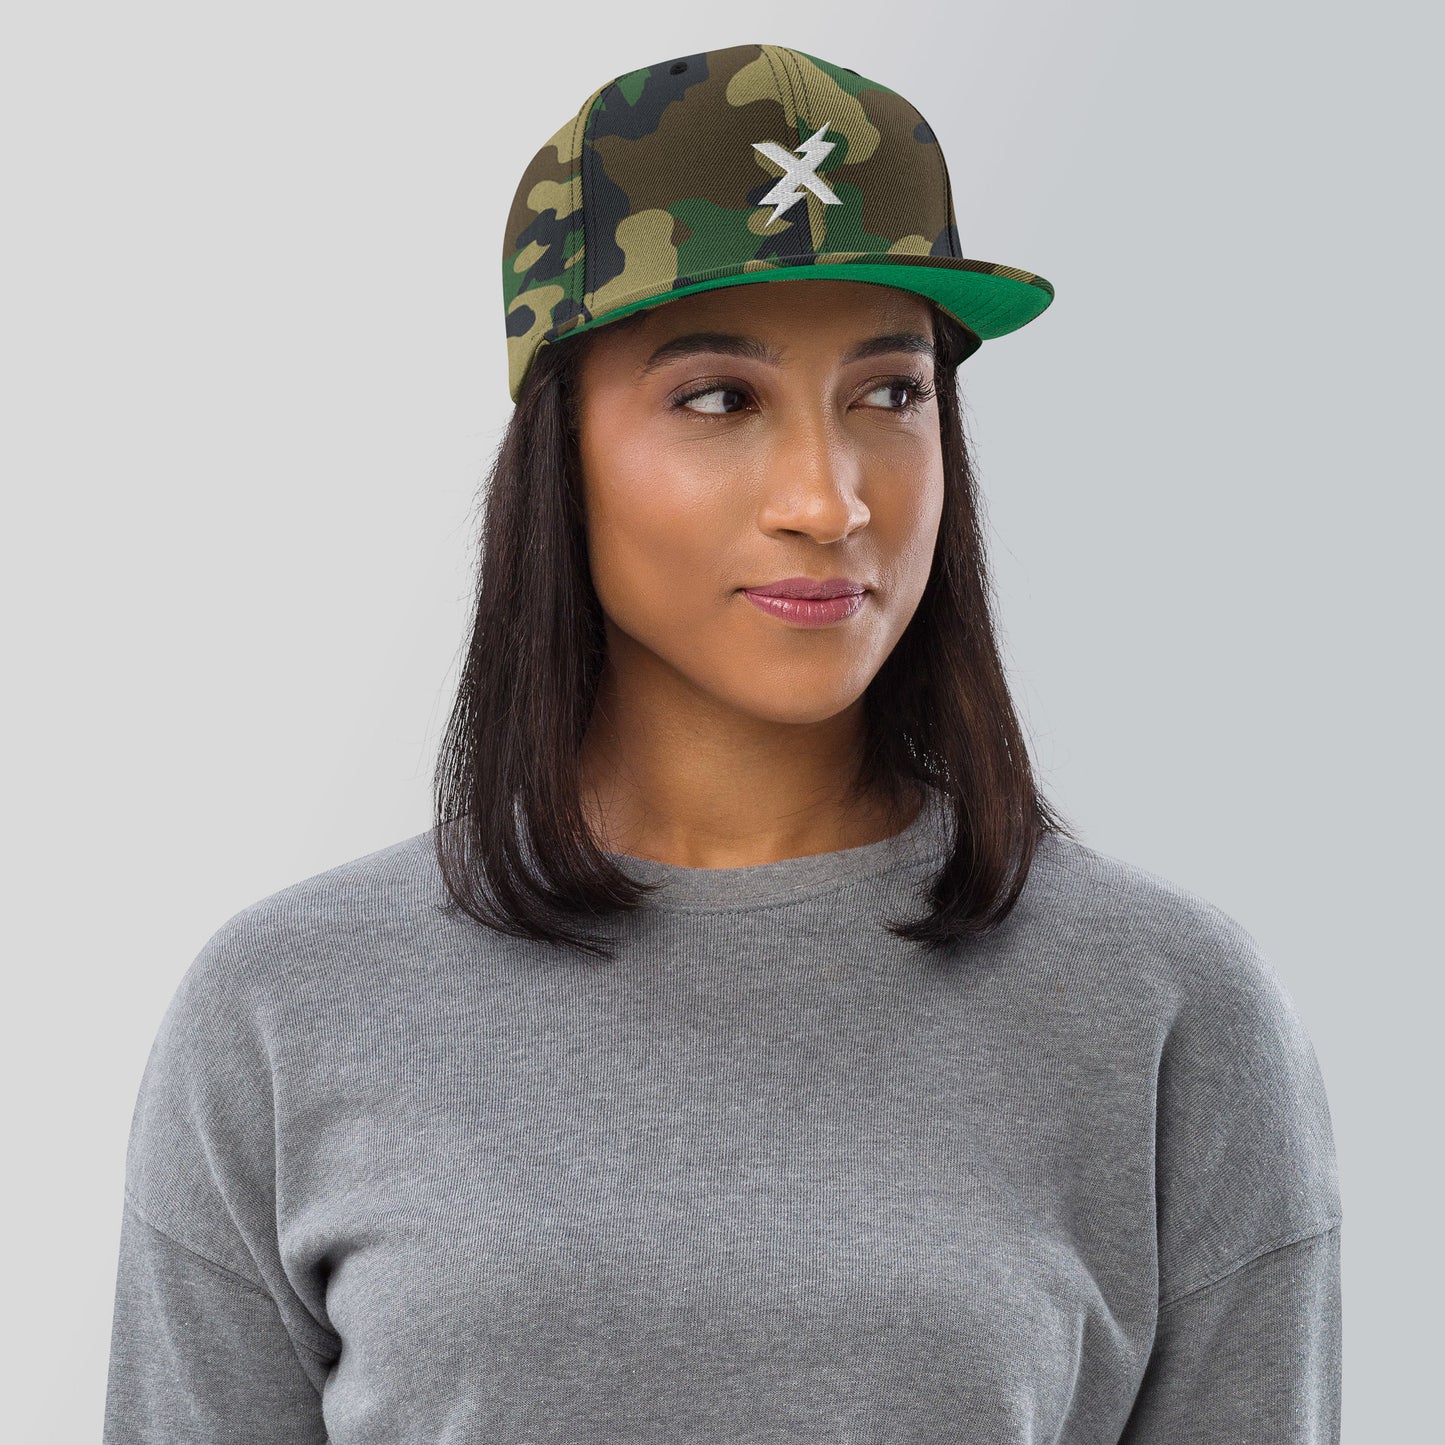 X - Embroidered Snapback Hat